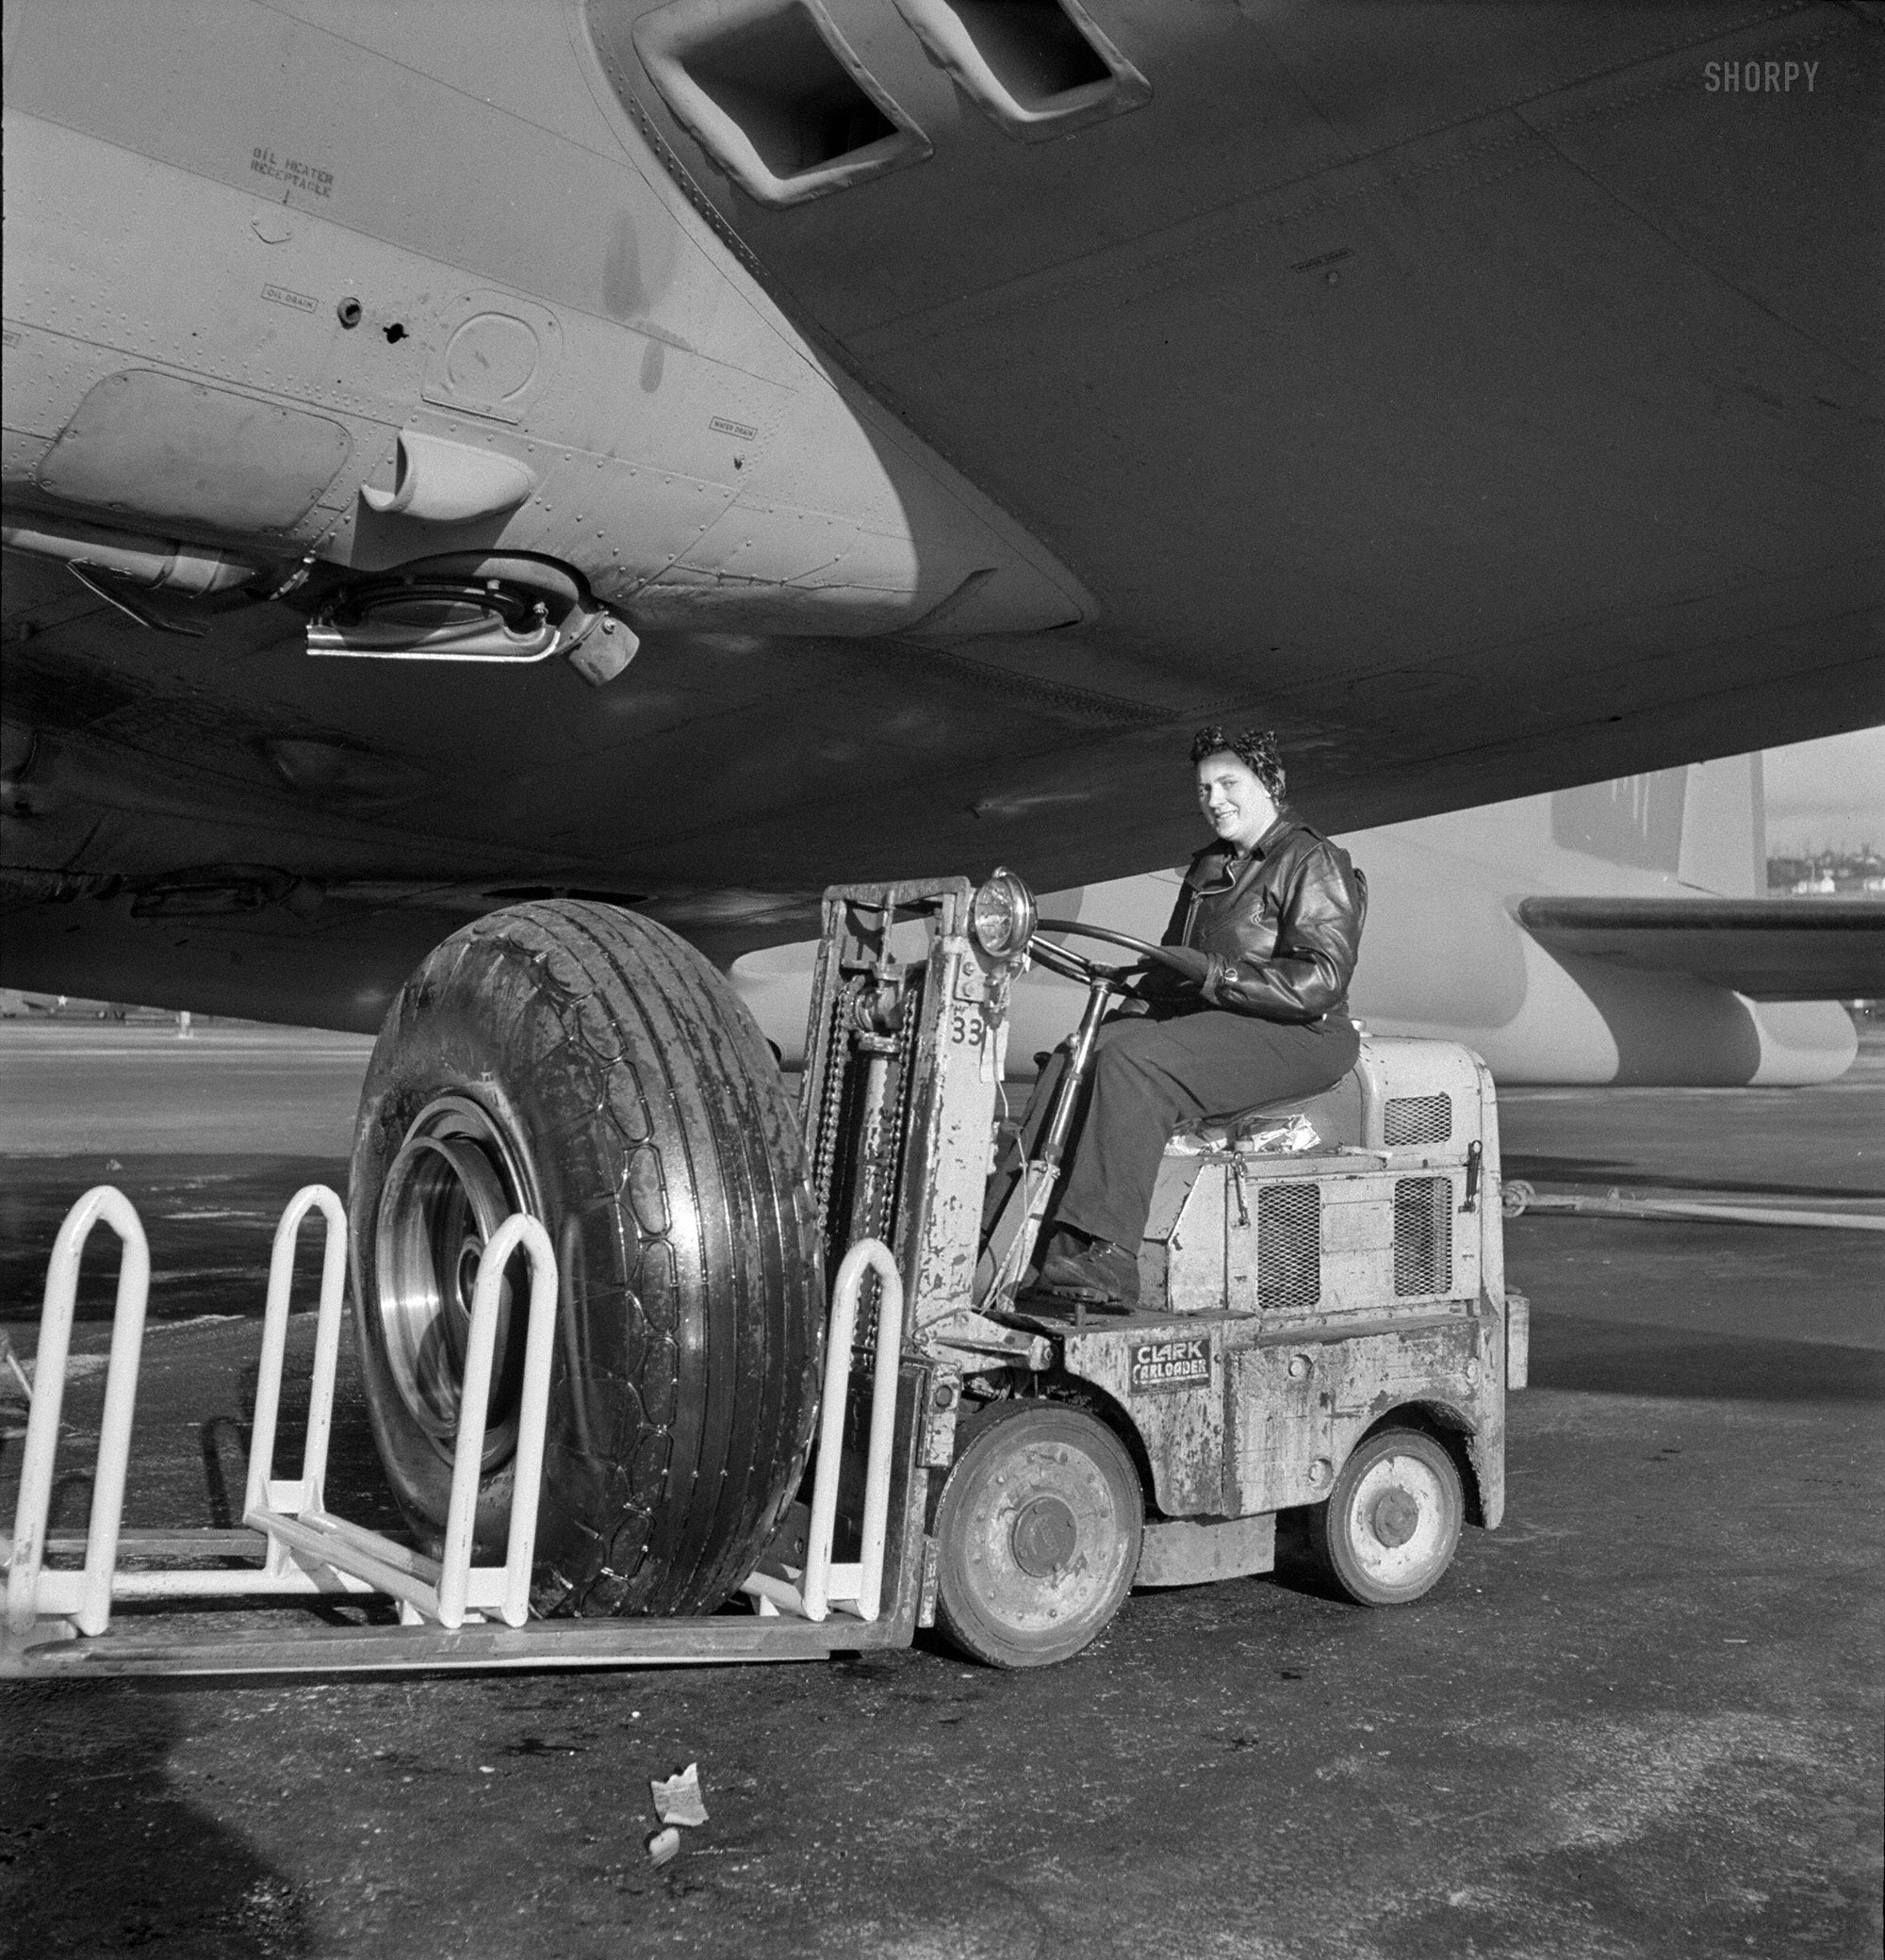 December 1942. "A landing wheel, with its huge rubber 'shoe,' is trundled out in a service tractor to a new B-17F (Flying Fortress) bomber awaiting completion at Boeing's Seattle plant. The tractor operator, like half of the plant's workers, is a woman." Photo by Andreas Feininger,  Office of War Information. View full size.